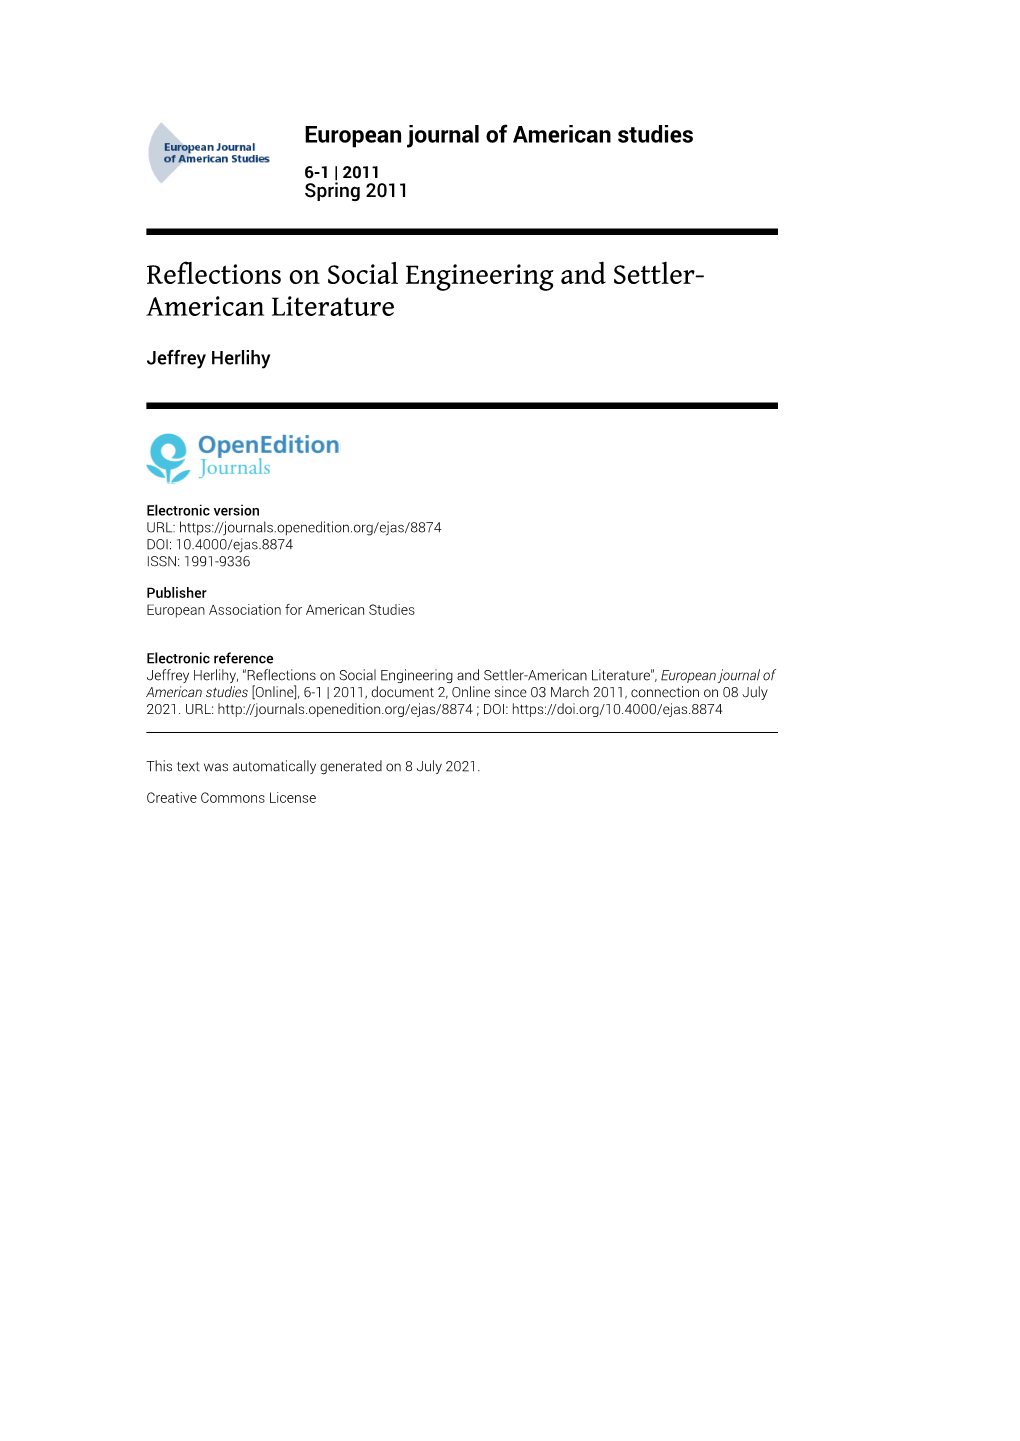 European Journal of American Studies, 6-1 | 2011 Reflections on Social Engineering and Settler-American Literature 2